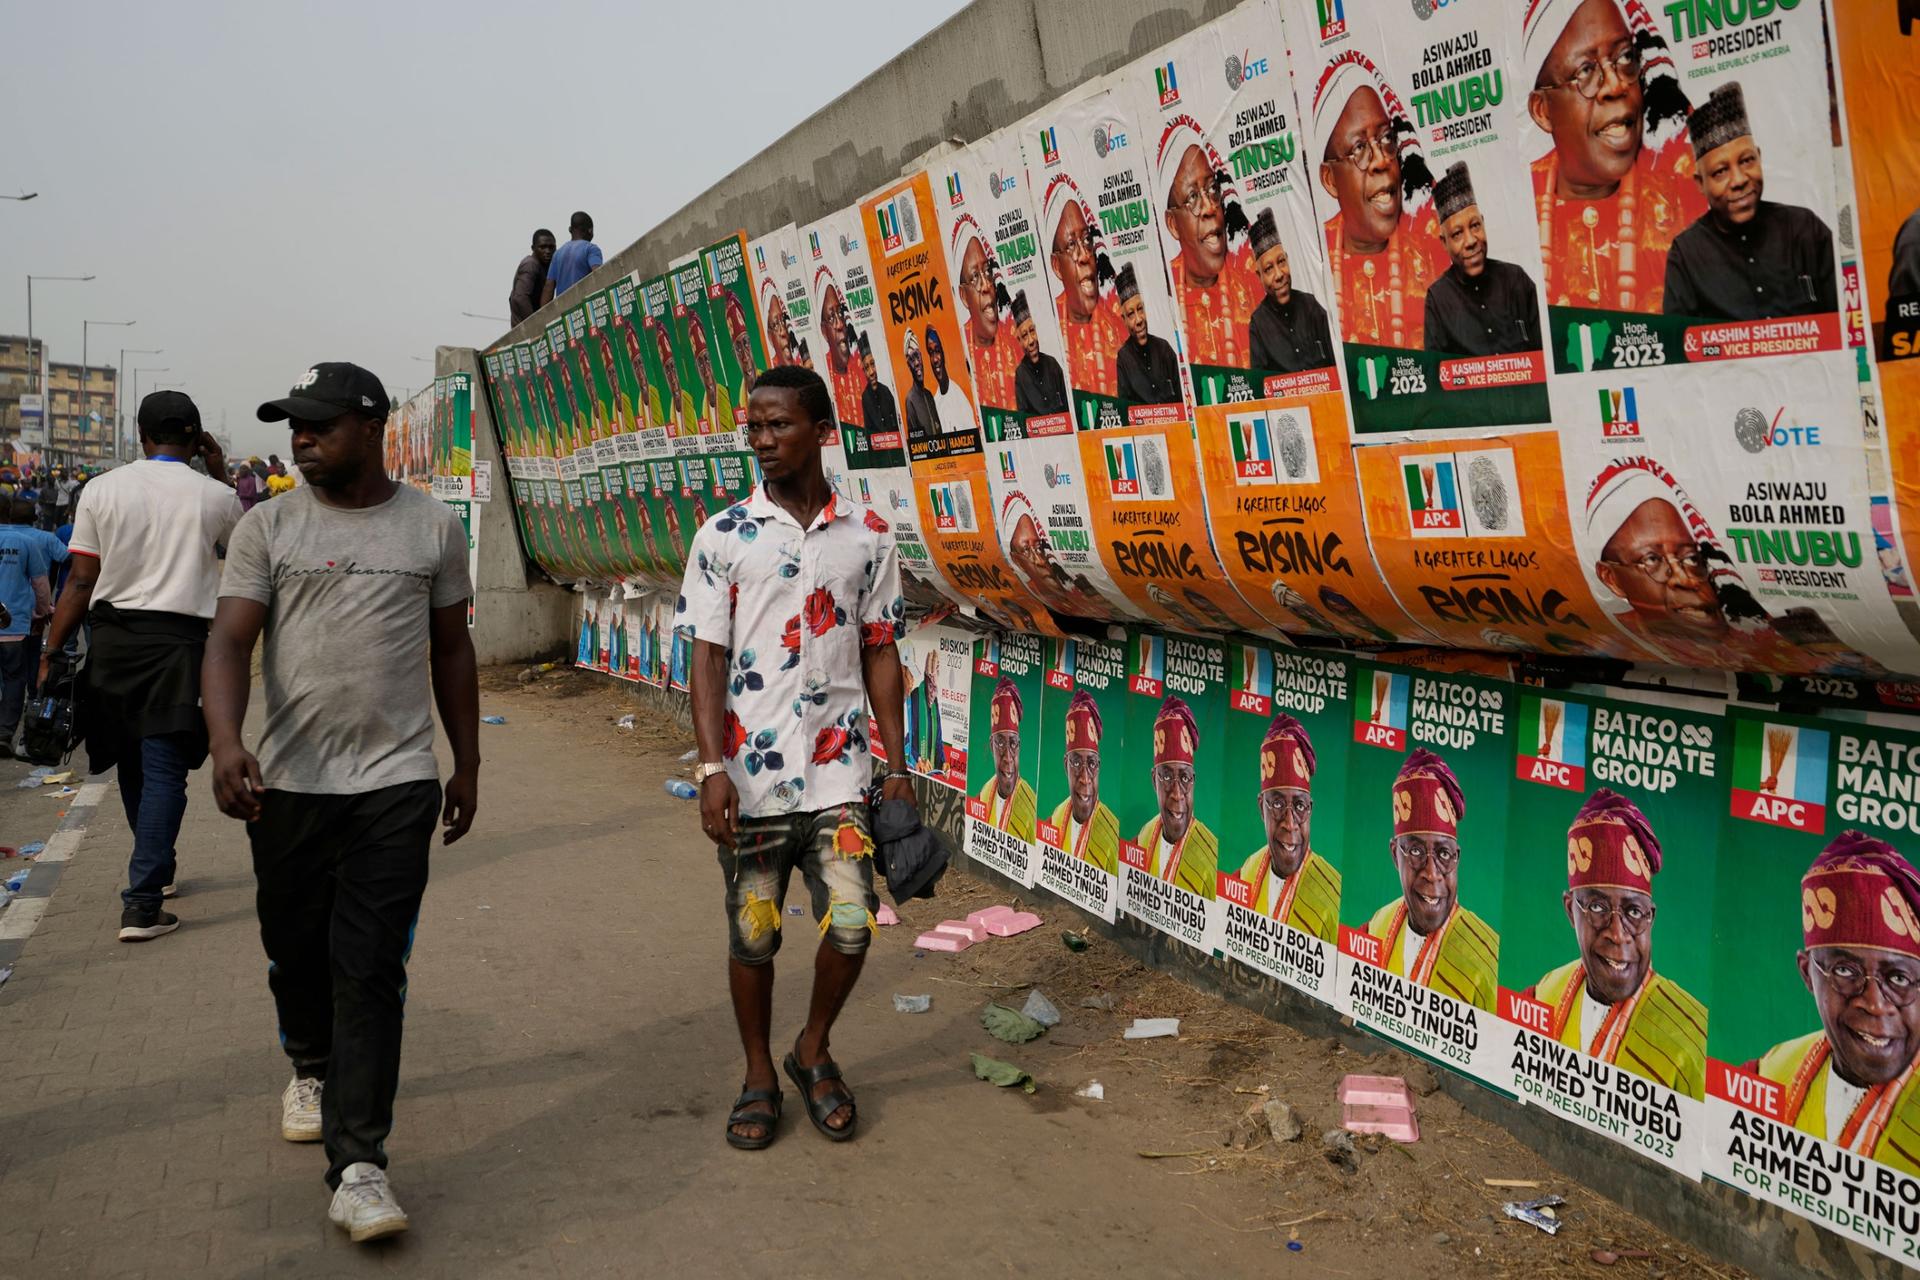 People walk past election campaign posters of Bola Ahmed Tinubu, presidential candidate of the All Progressives Congress, Nigeria ruling party during an election campaign rally at the Teslim Balogun Stadium in Lagos Nigeria, Tuesday, Feb. 21, 2023. 